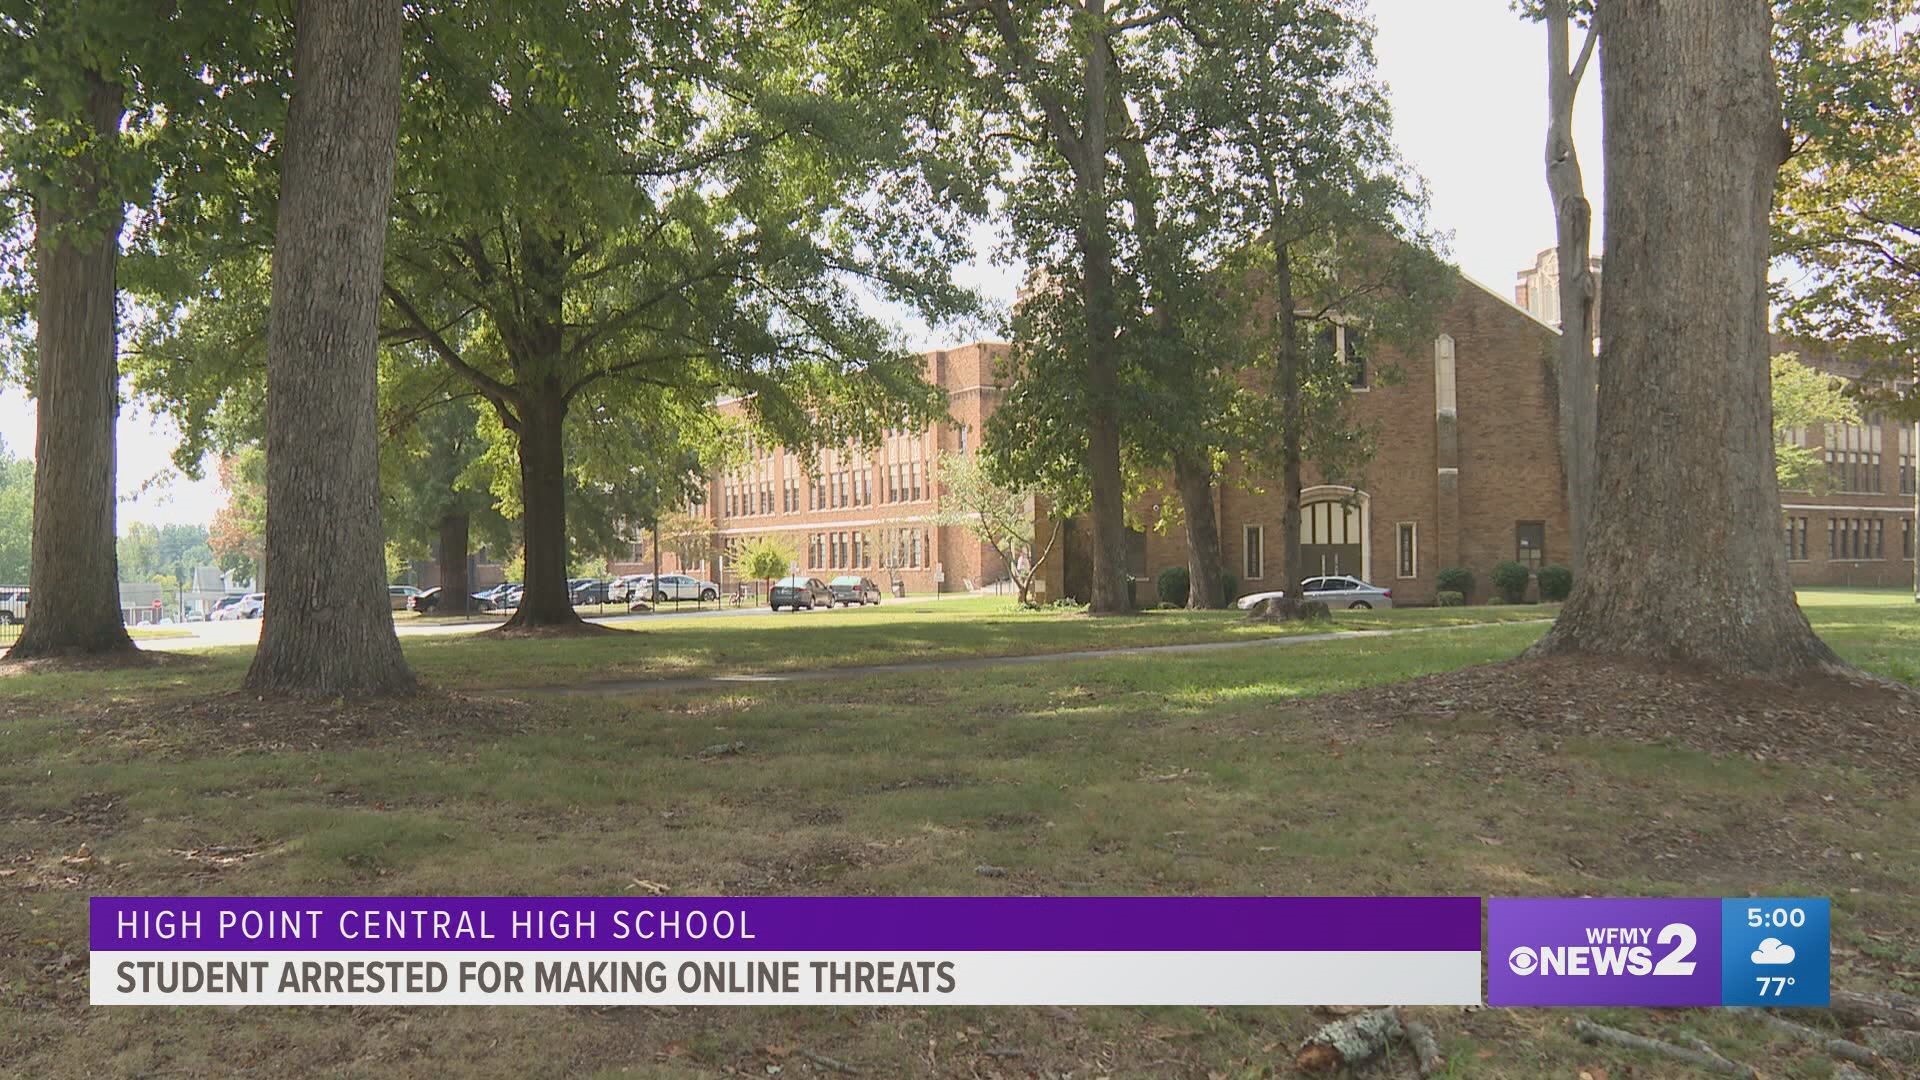 High Point police said a juvenile was arrested and sent to the Guilford County Detention Center Sunday after posting a threat on social media involving the school.